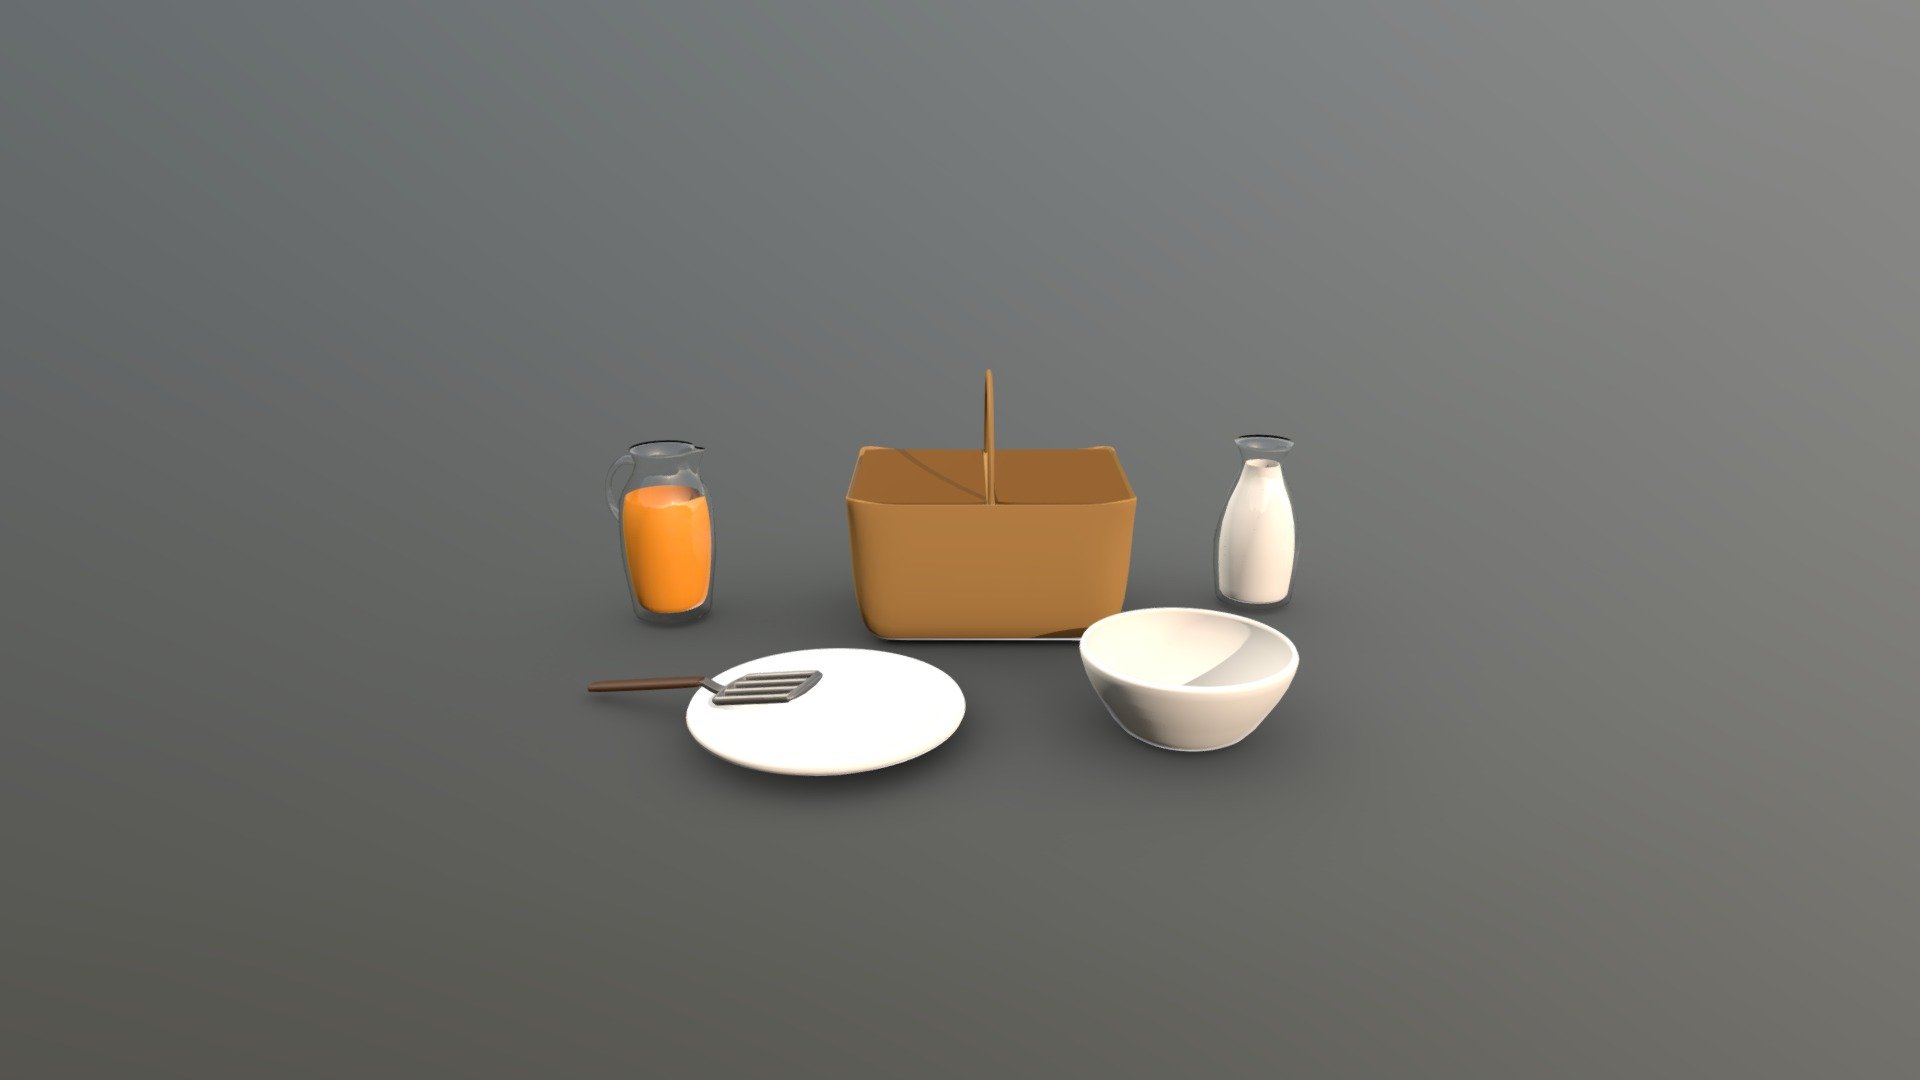 Type: University Work

A selection of picnic items I modelled using Autodesk Maya as part of a university project. This was part of a picnic scene 3d model